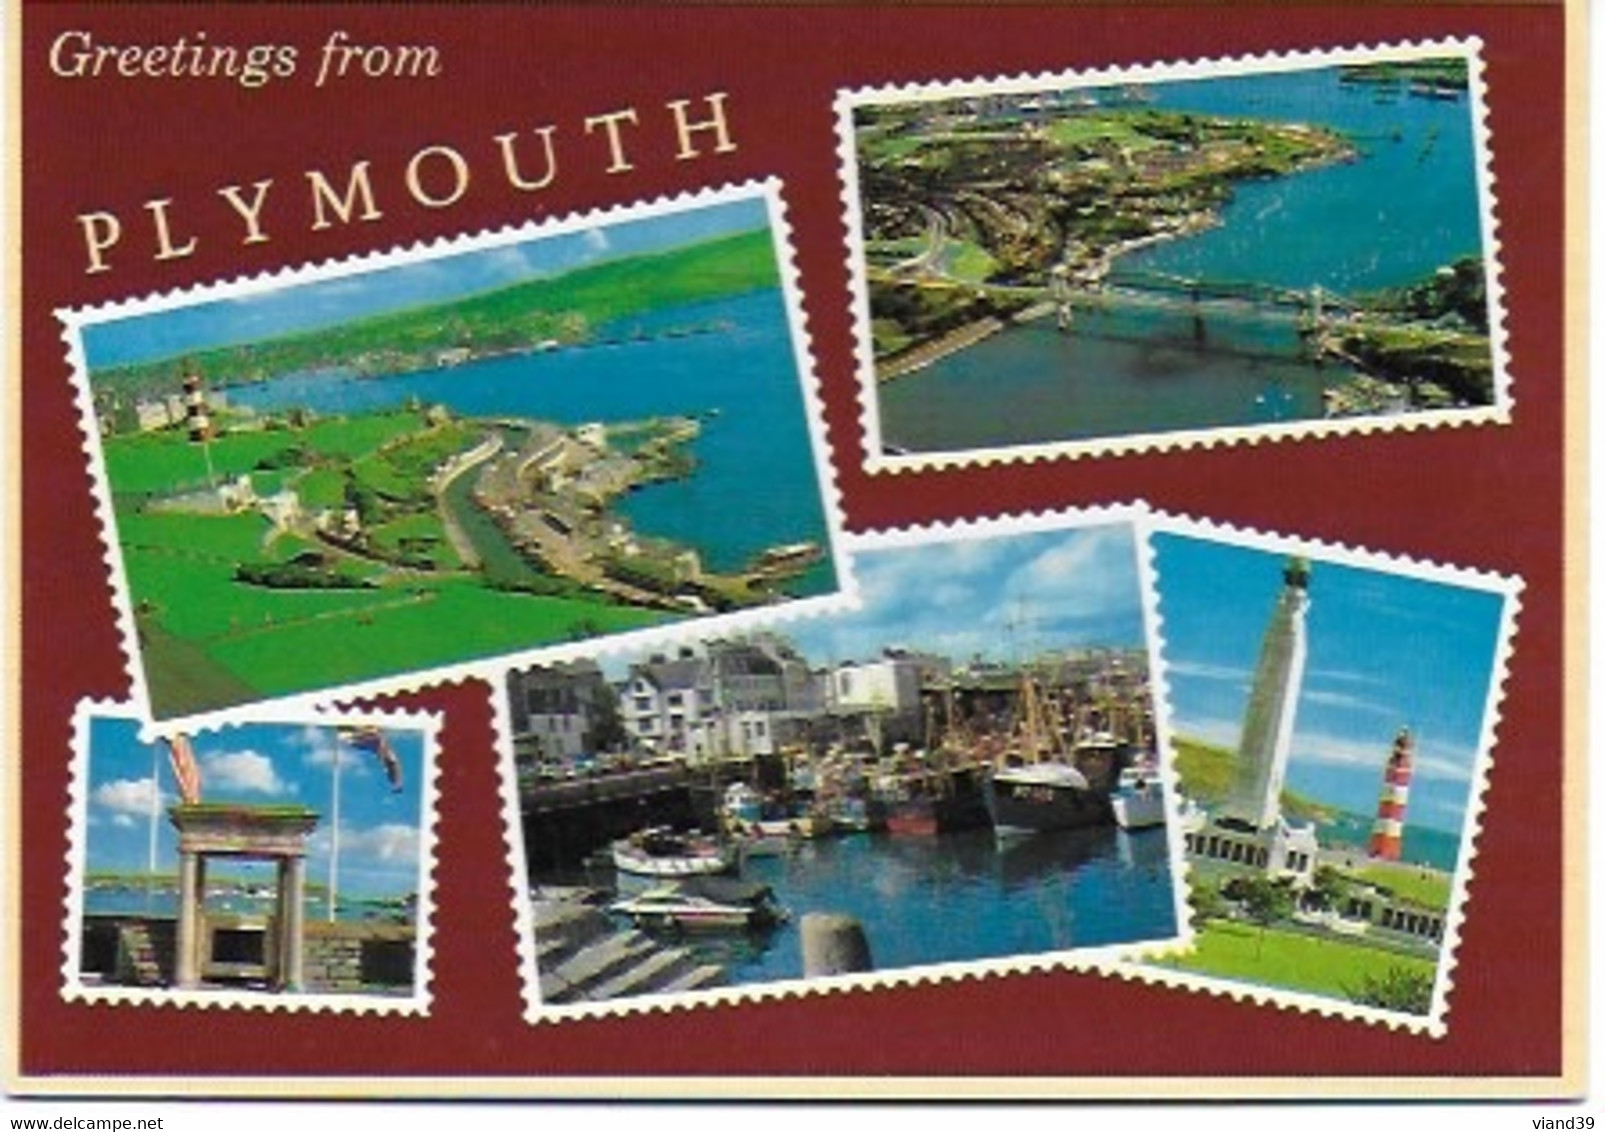 Greetings From Plymouth - Plymouth